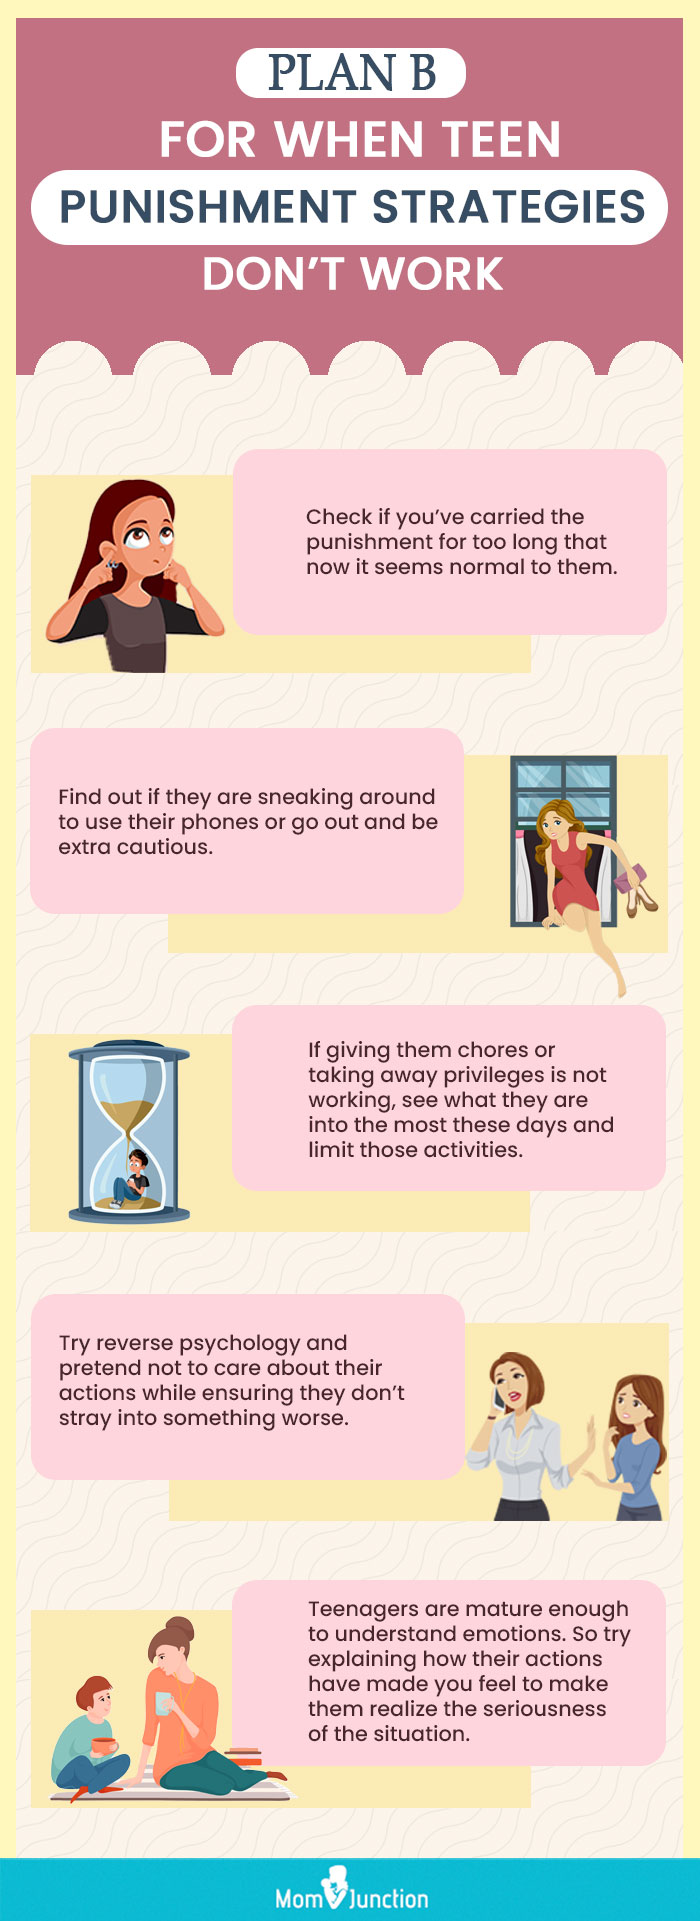 plan b for when teen punishment strategies don’t work (infographic)